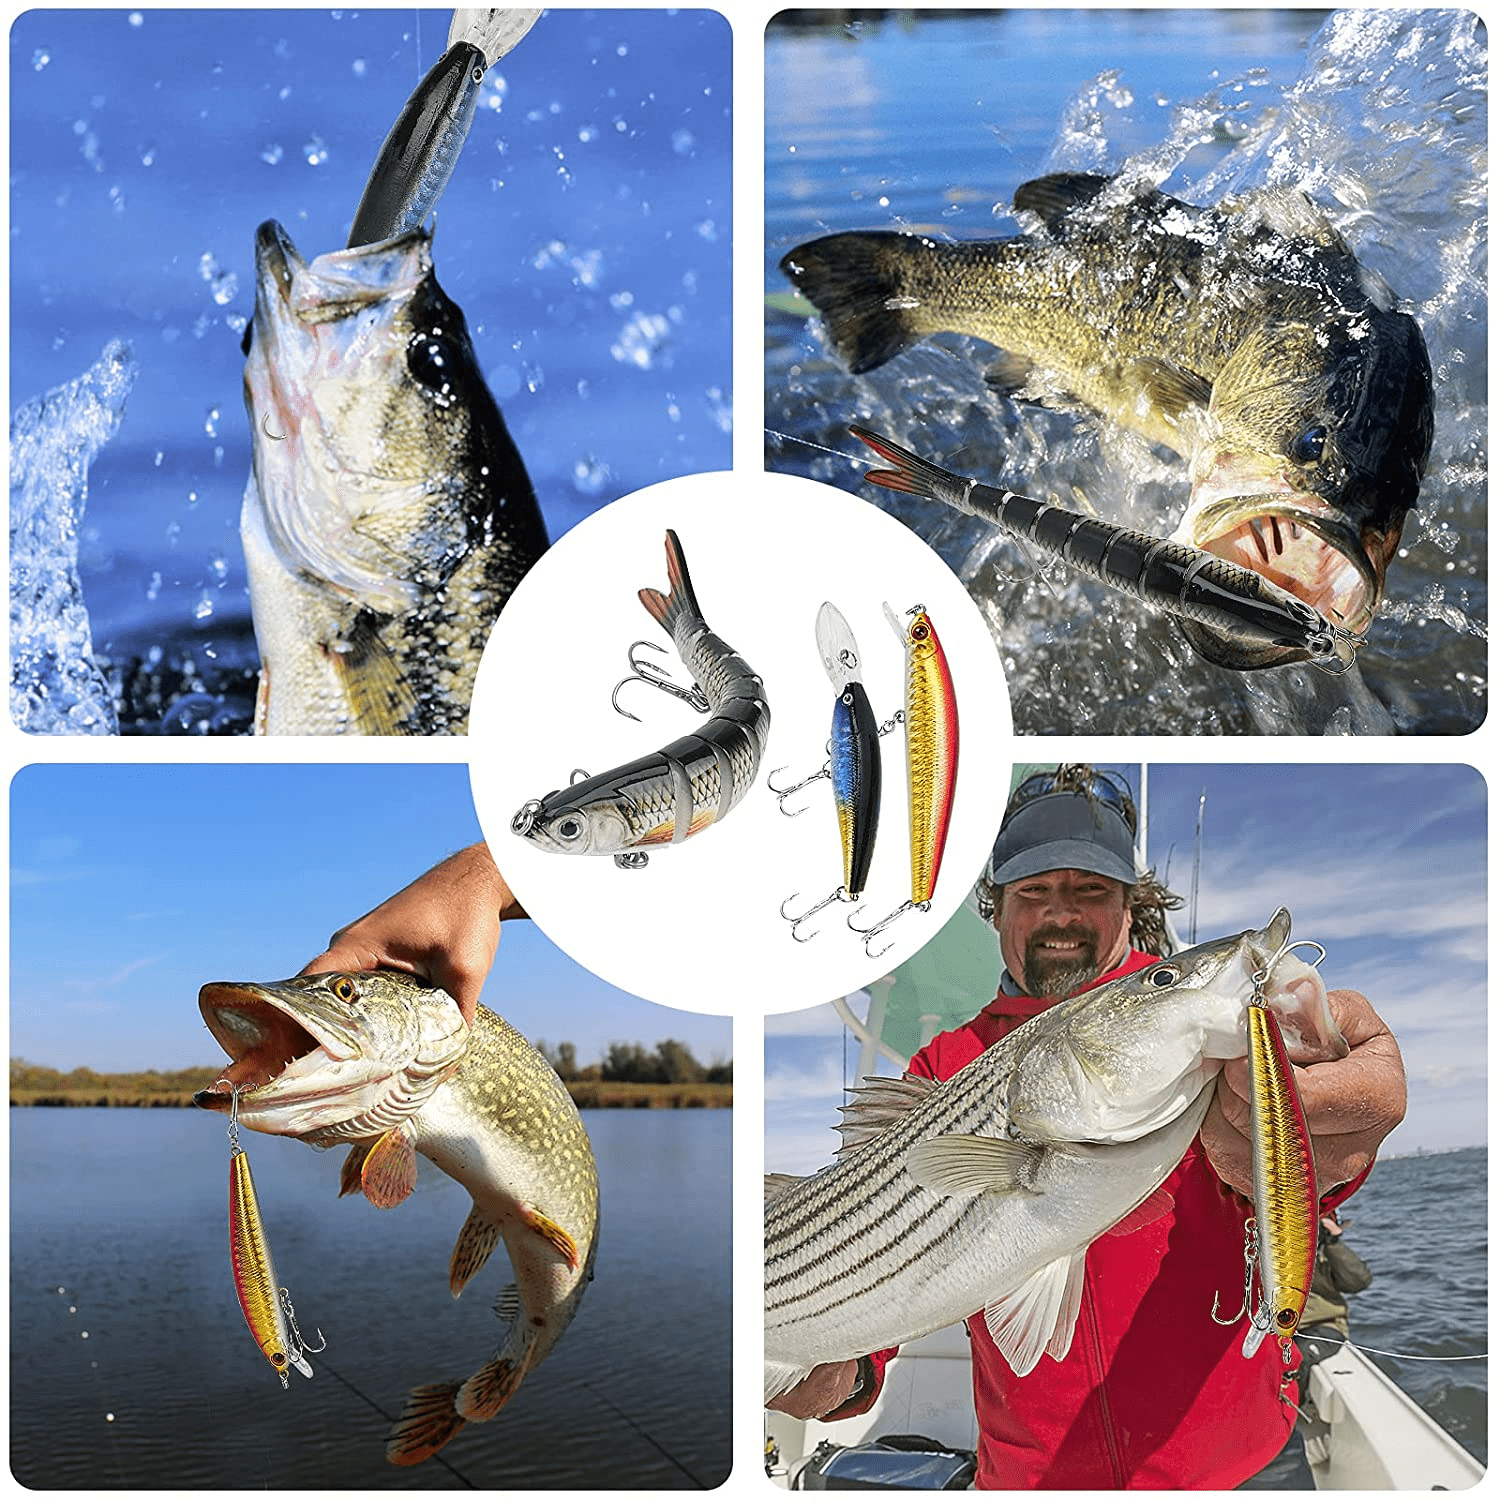 Fishing Lures Tackle Box Bass Fishing Including Animated Lure,Crankbaits,Spinnerbaits,Soft Plastic Worms, Jigs,Topwater Lures,Hooks,Saltwater & Freshwater Fishing Kit for Bass,Trout, Salmon Fishing.